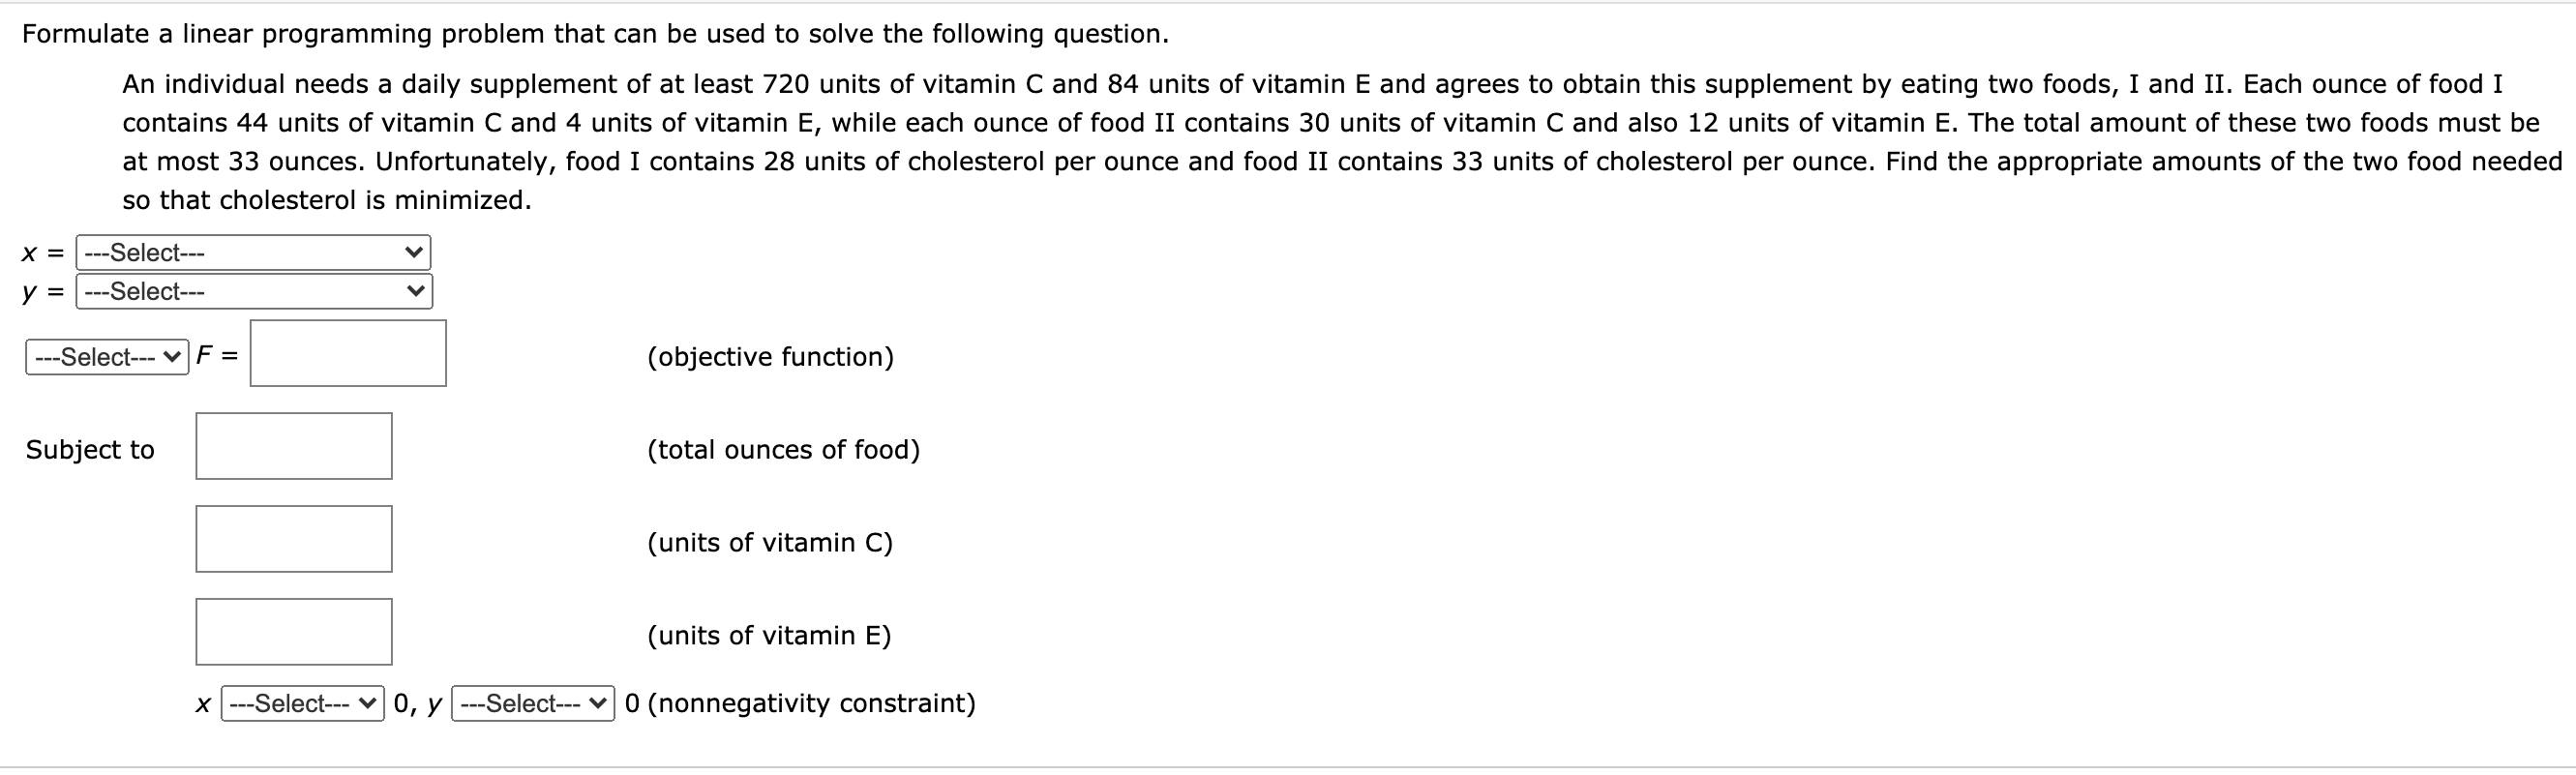 Formulate a linear programming problem that can be used to solve the following question.
An individual needs a daily supplement of at least 720 units of vitamin C and 84 units of vitamin E and agrees to obtain this supplement by eating two foods, I and II. Each ounce of food I
contains 44 units of vitamin C and 4 units of vitamin E, while each ounce of food II contains 30 units of vitamin C and also 12 units of vitamin E. The total amount of these two foods must be
at most 33 ounces. Unfortunately, food I contains 28 units of cholesterol per ounce and food II contains 33 units of cholesterol per ounce. Find the appropriate amounts of the two food needed
so that cholesterol is minimized.
X = |---Select---
y =
---Select---
---Select--- vF =
(objective function)
Subject to
(total ounces of food)
(units of vitamin C)
(units of vitamin E)
X ---Select---
0, y ---Select-- v 0 (nonnegativity constraint)
